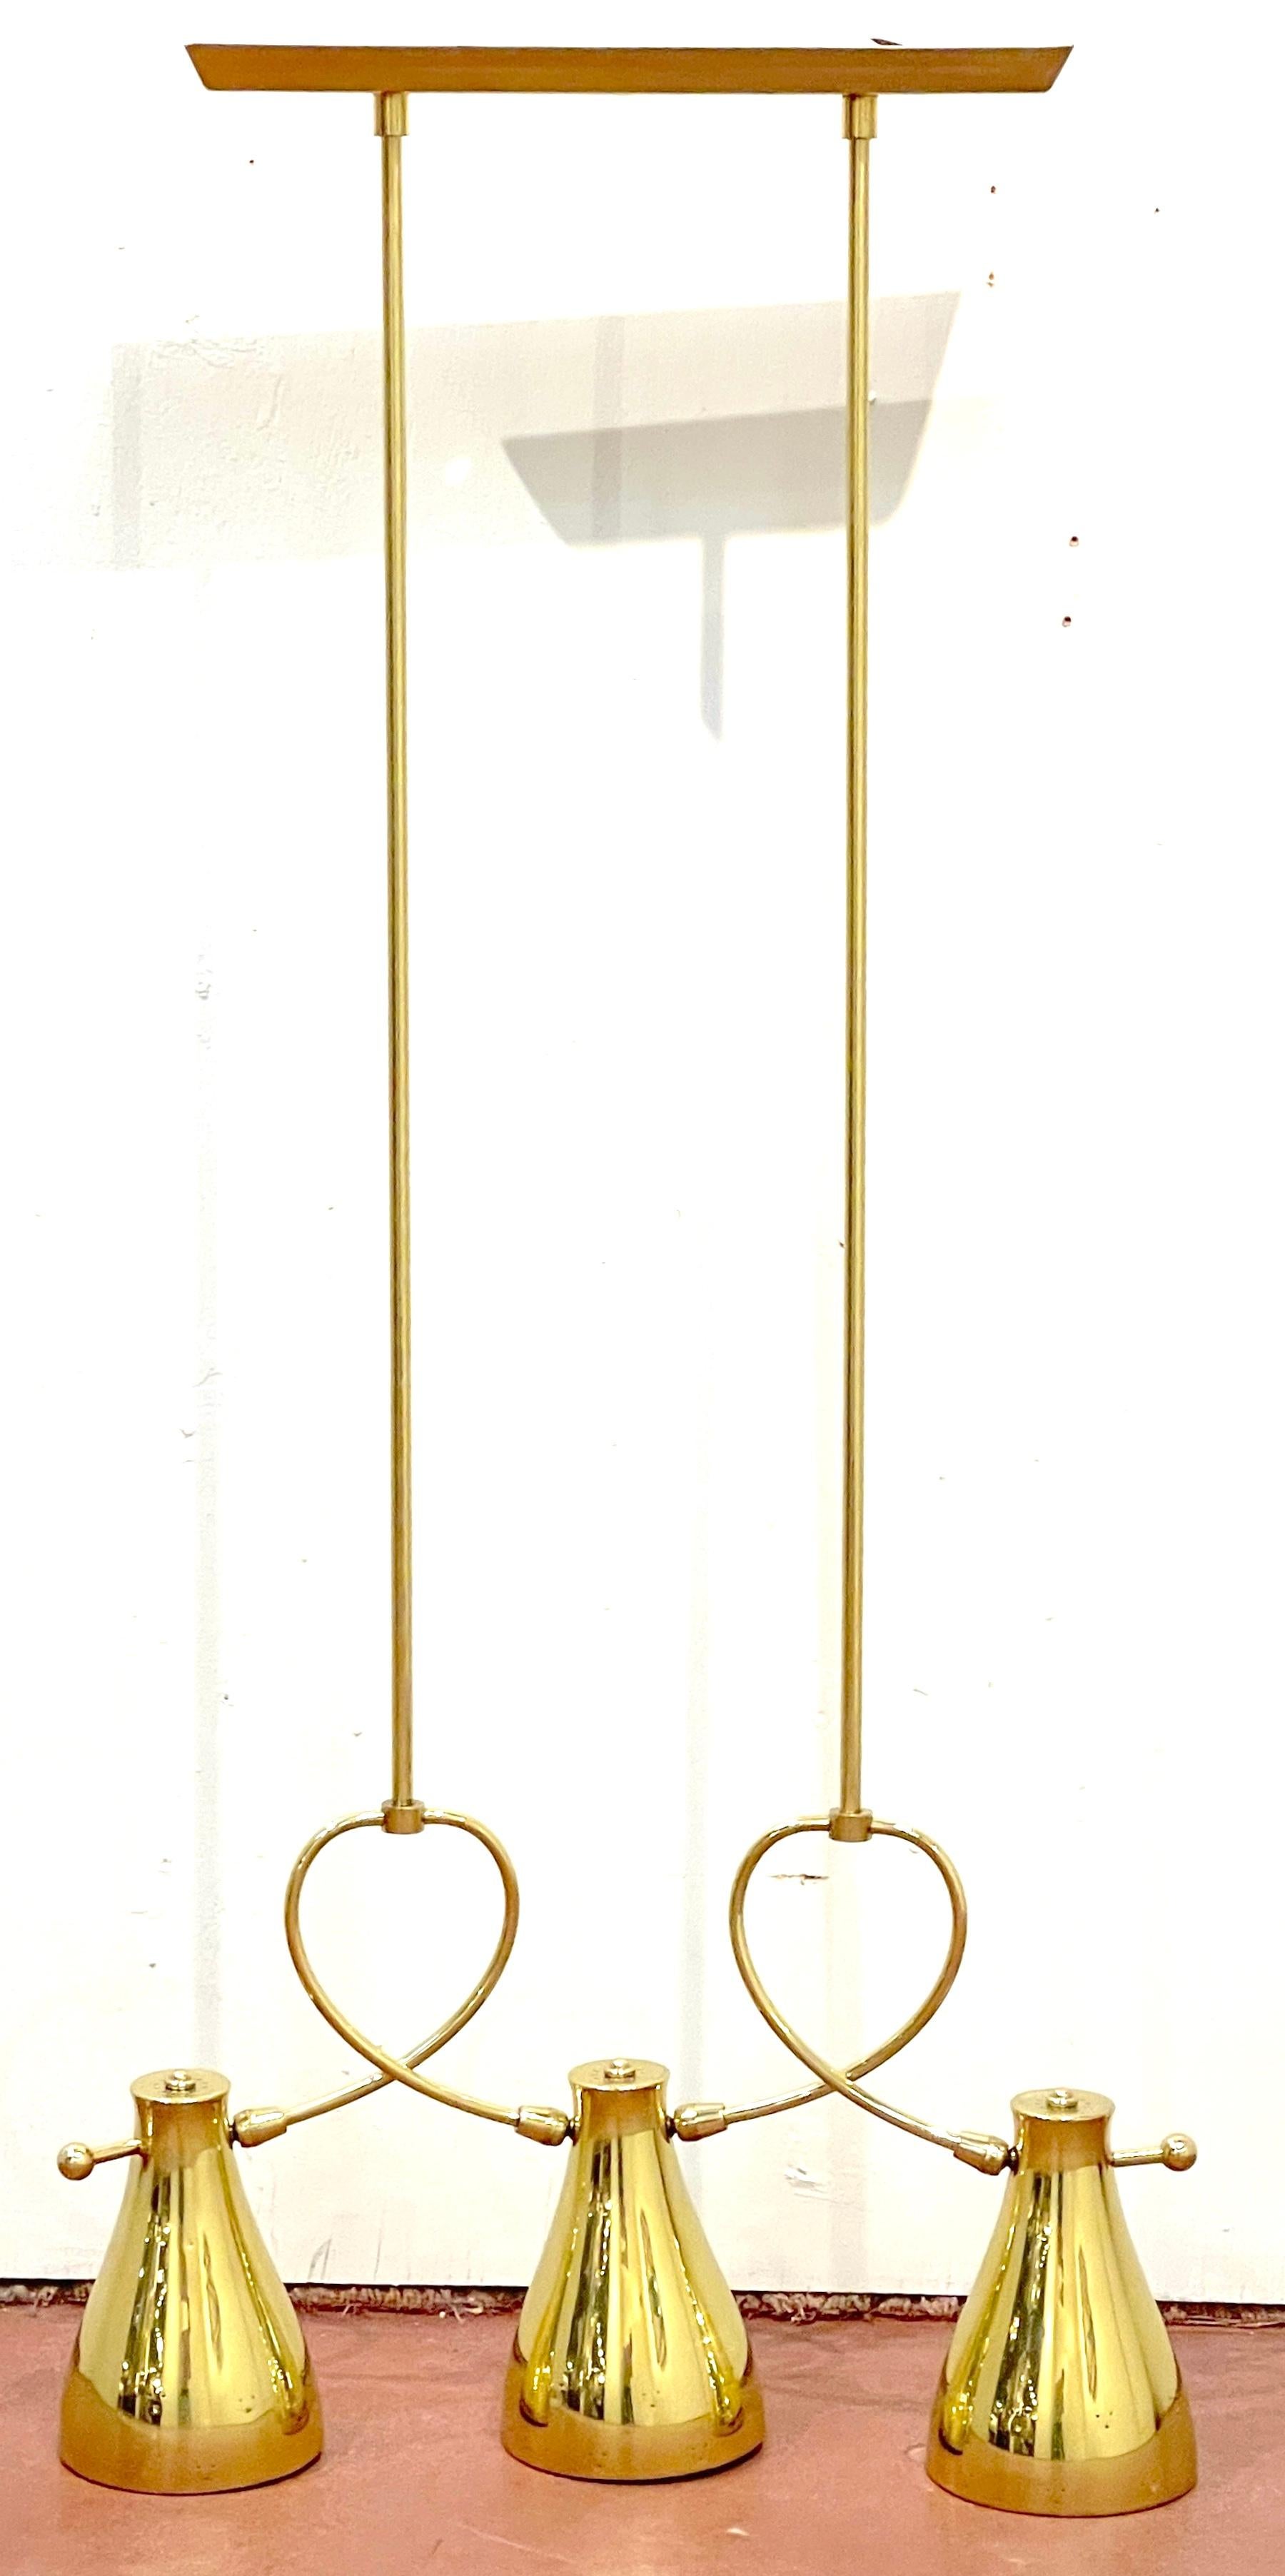 Paavo Tynell for Lightolier, Large Brass Pendant Lamp/Chandelier, 1950s
USA, 20th century

An exceptional design, this Paavo Tynell for Lightolier Large Brass Pendant Lamp/Chandelier is a true gem from the mid-20th century. Designed with tailored